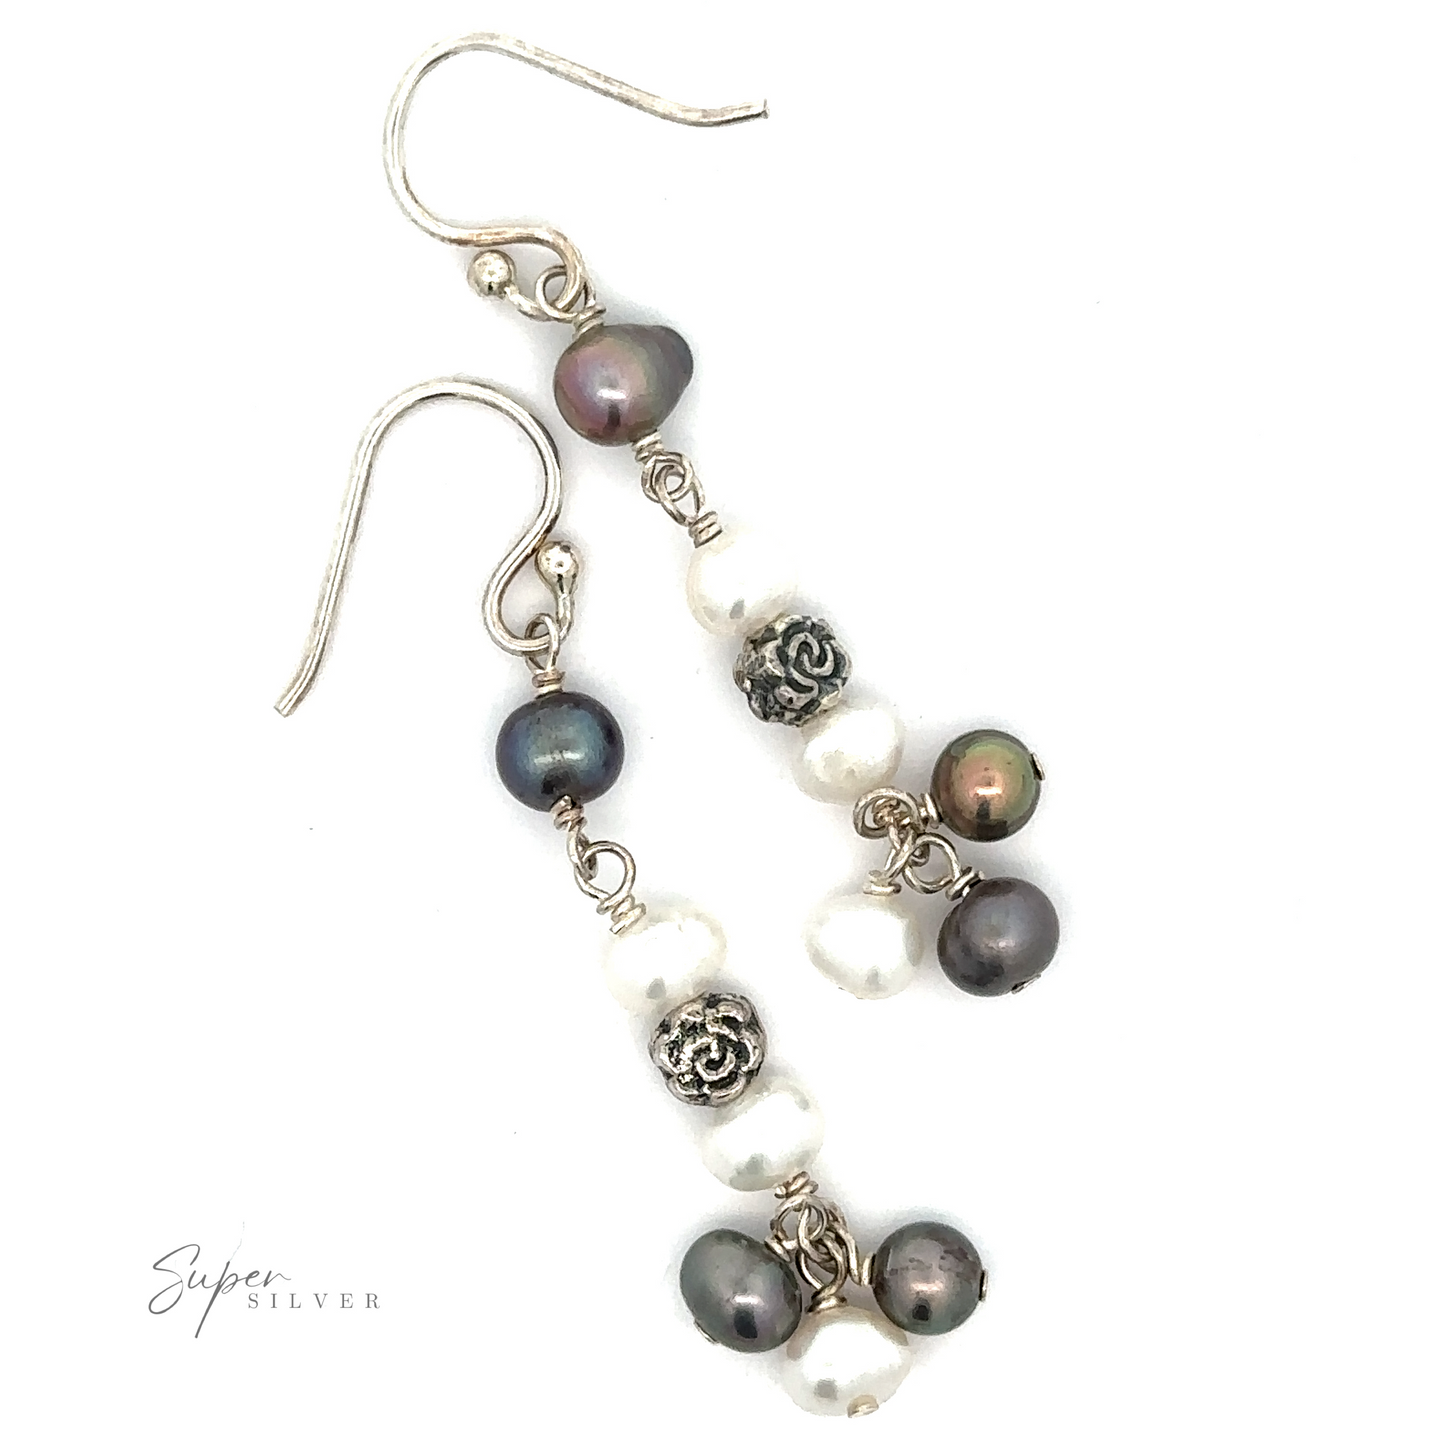 
                  
                    A pair of dangle earrings adorned with white and dark pearls, featuring sterling silver decorative beads and hook findings. The earrings are branded "Floral Pearl Bead Earrings".
                  
                